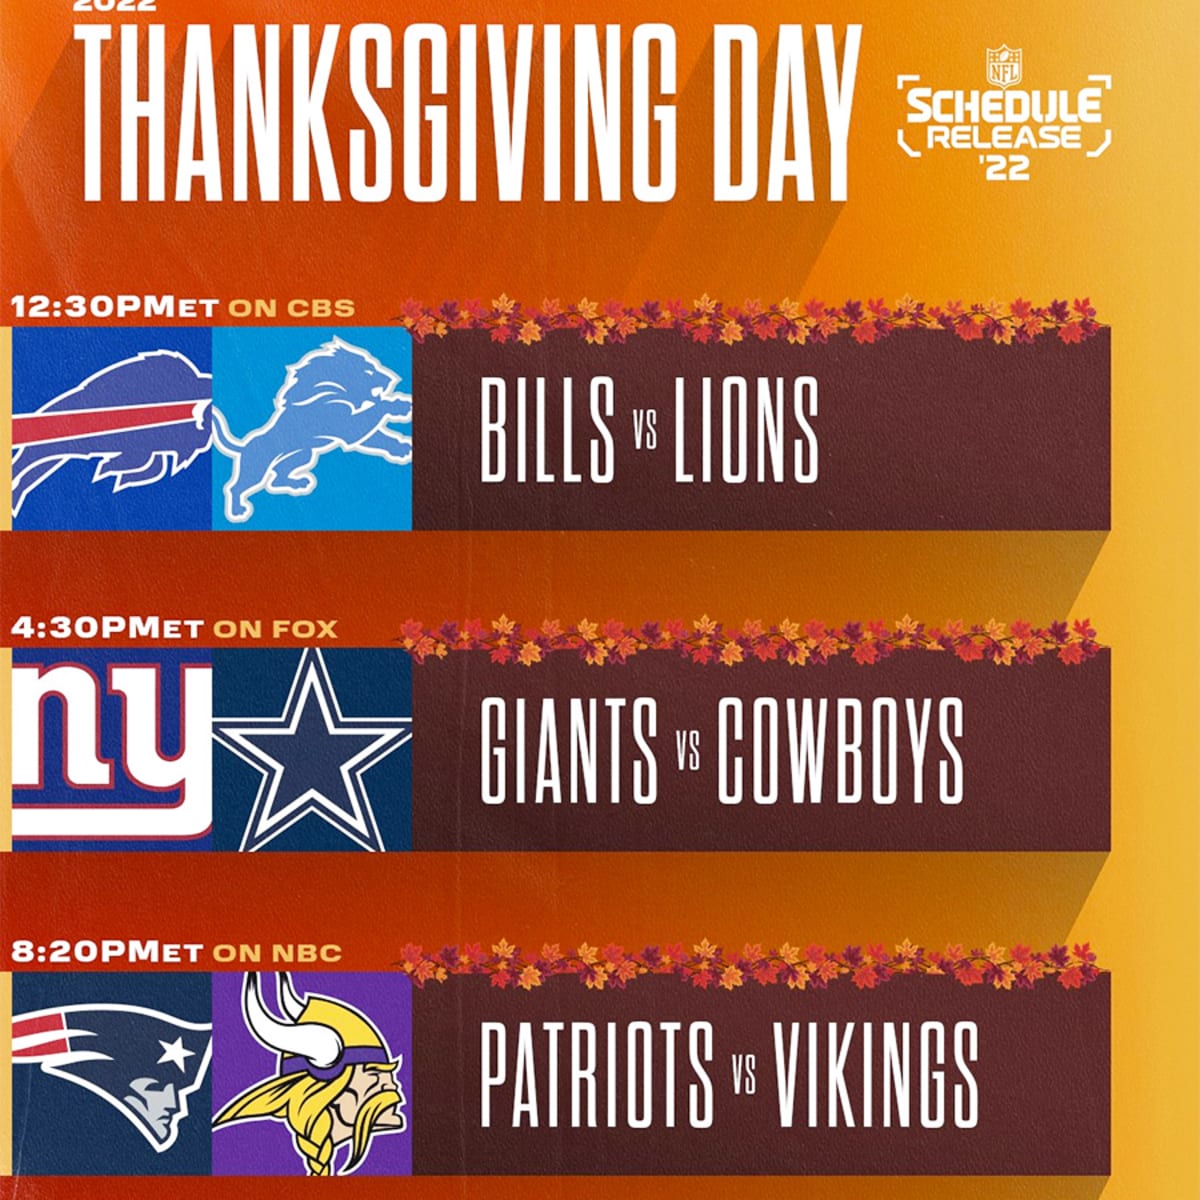 NFL Thanksgiving Games: History and 2022 Schedule - 2022